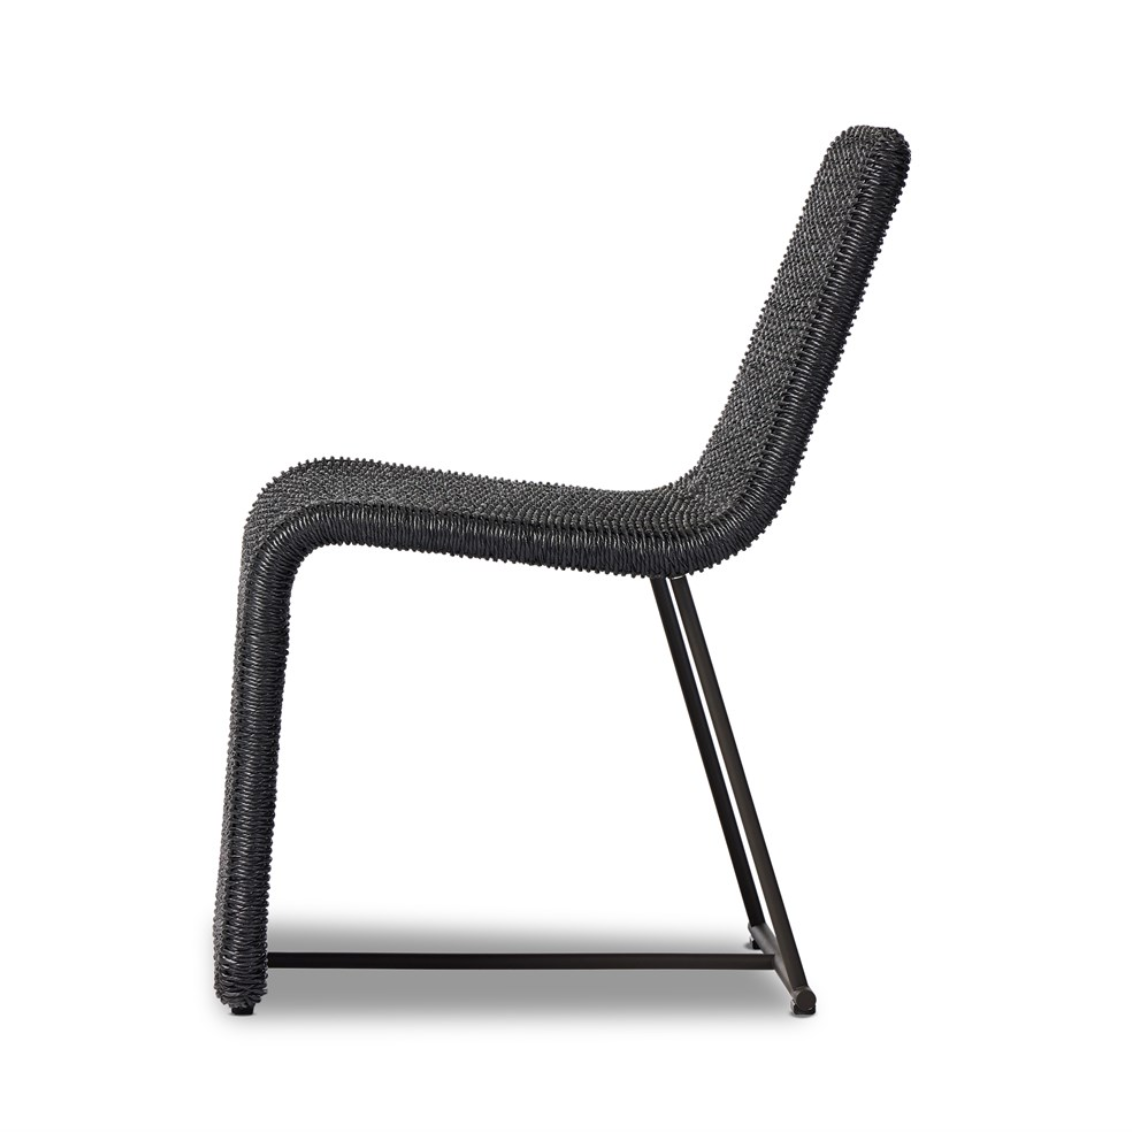 Branon Outdoor Black Hyacinth Dining Chair